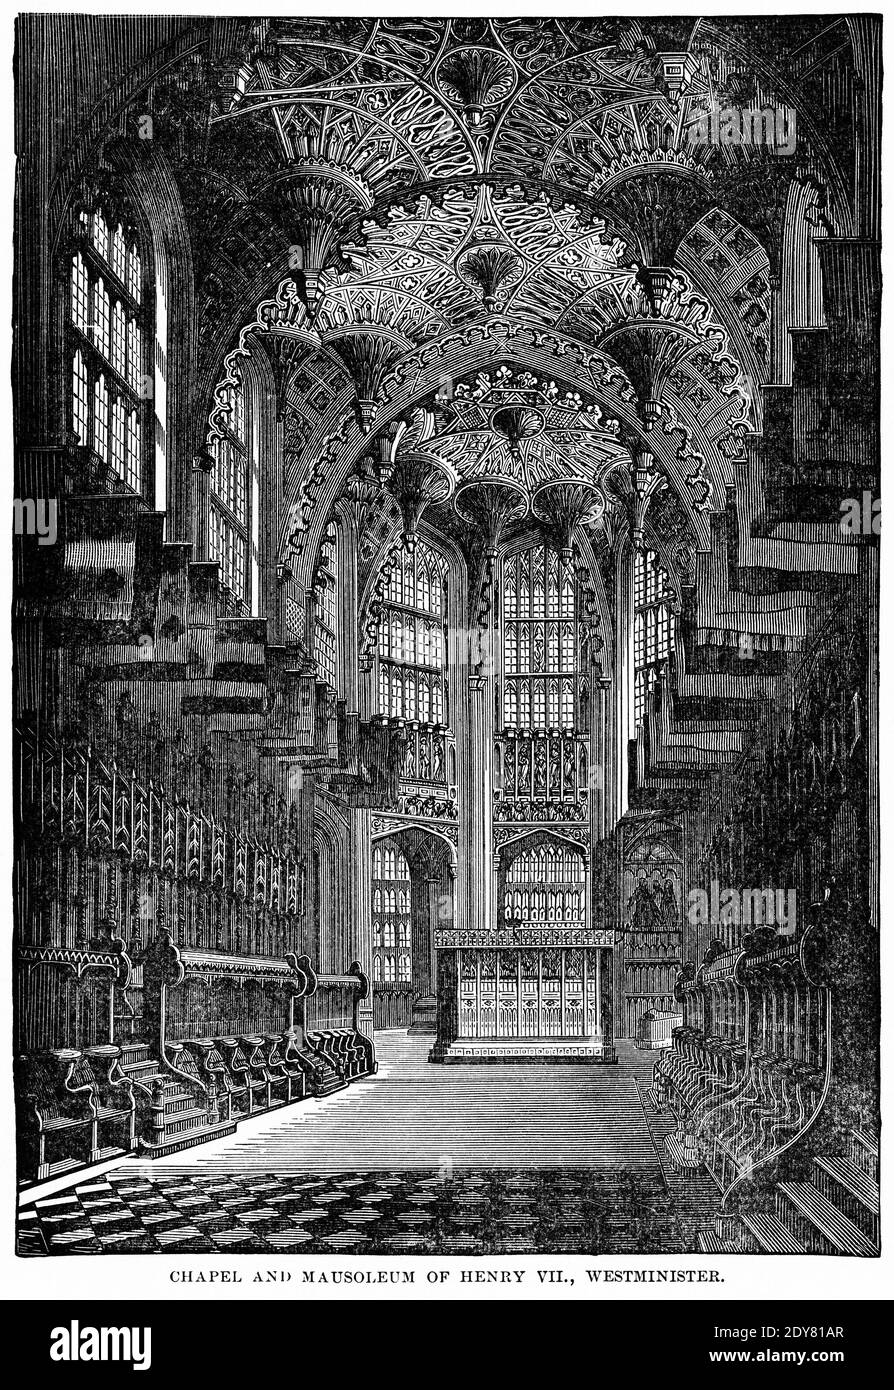 Chapel and Mausoleum of Henry VII, Westminster, Illustration, Ridpath's History of the World, Volume III, by John Clark Ridpath, LL. D., Merrill & Baker Publishers, New York, 1897 Stock Photo